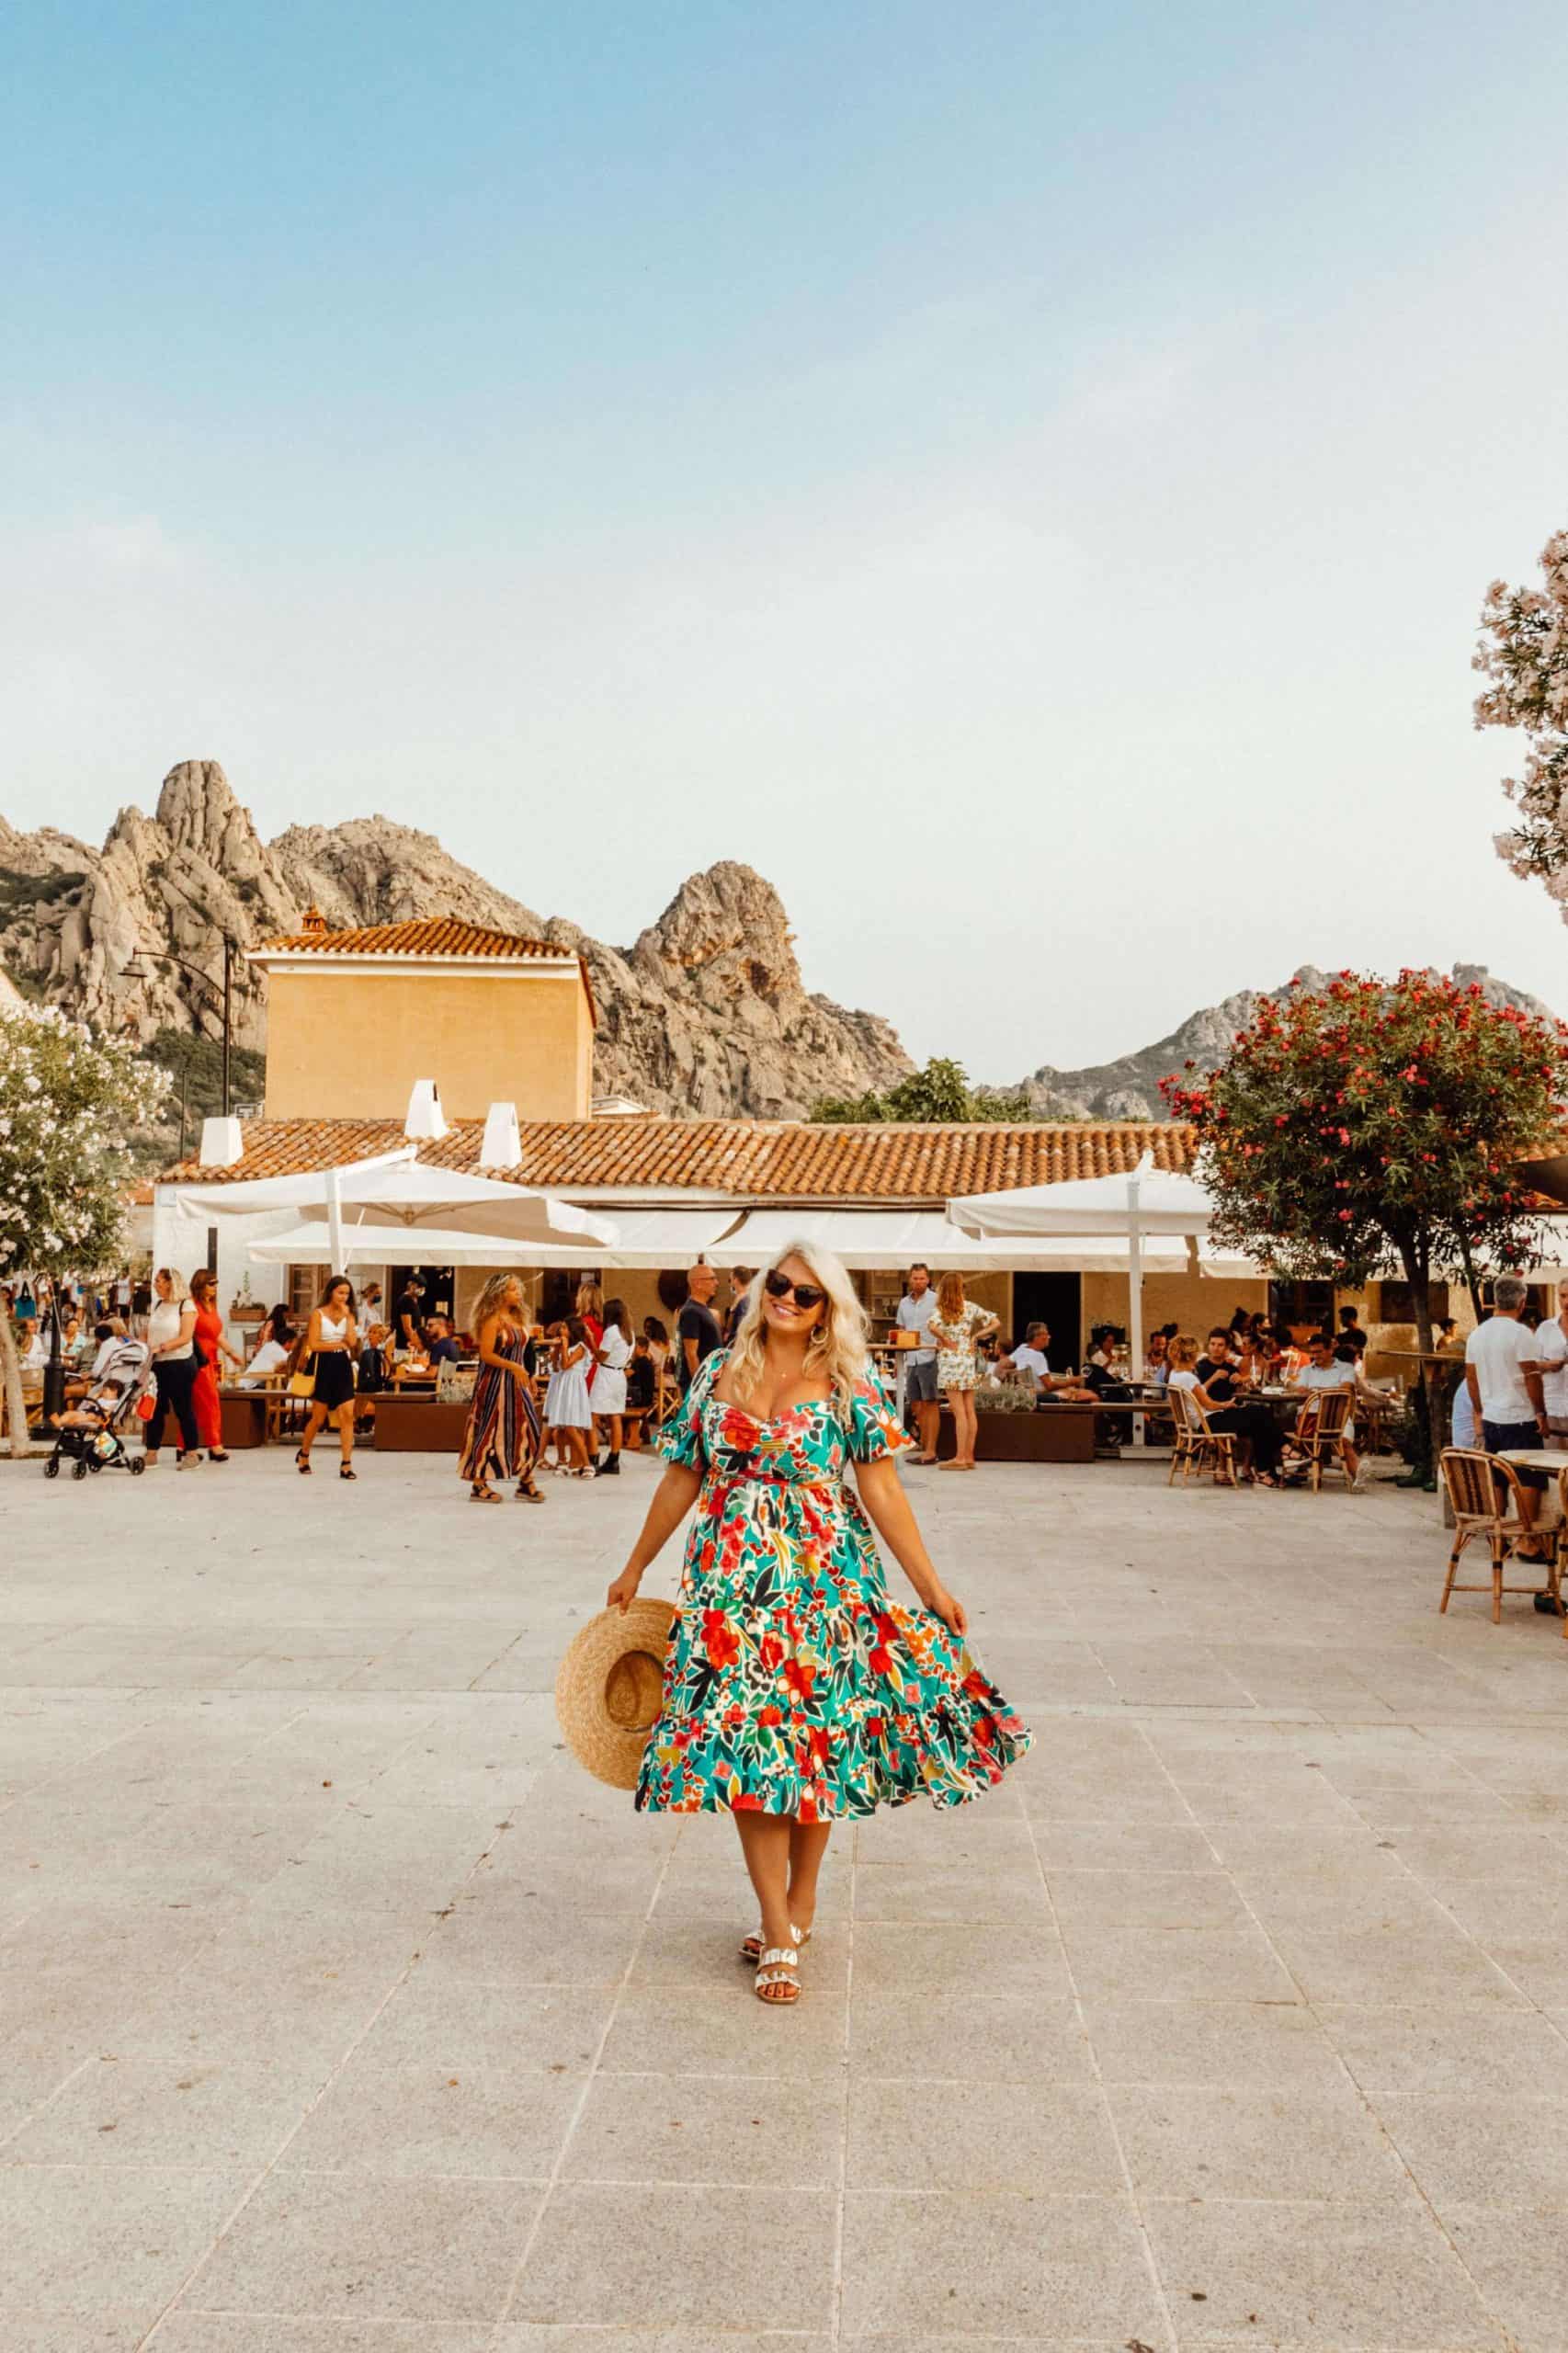 The Best Places to Visit in Costa Smeralda | San Pantaleo